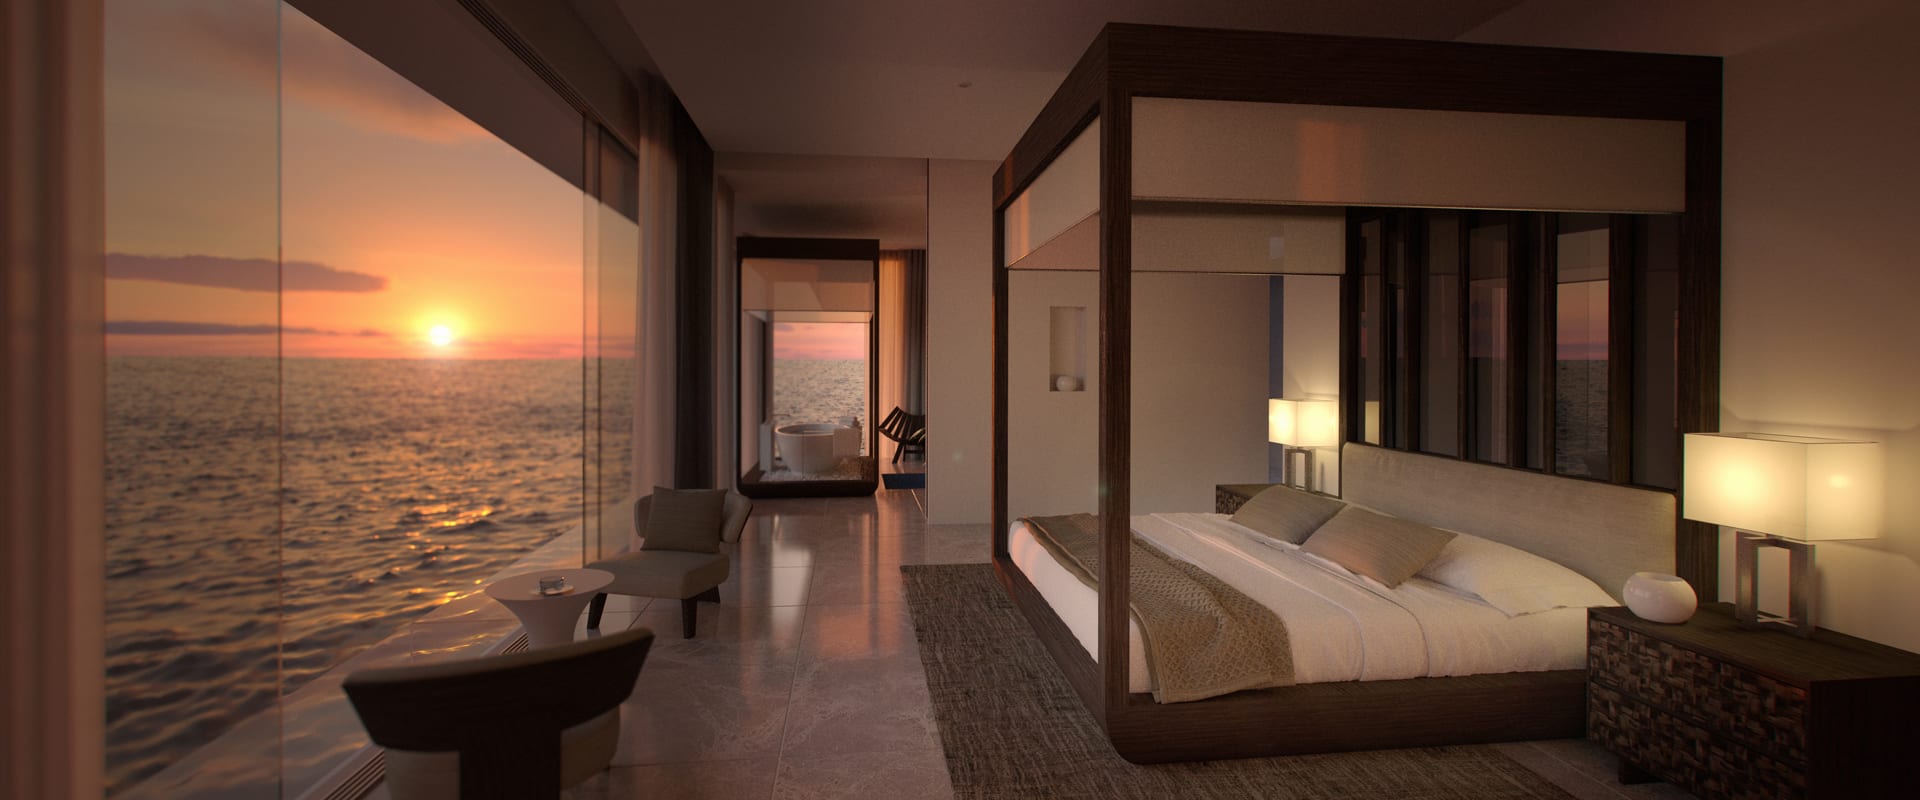 The master bedroom on the upper deck offers sweeping views of the ocean